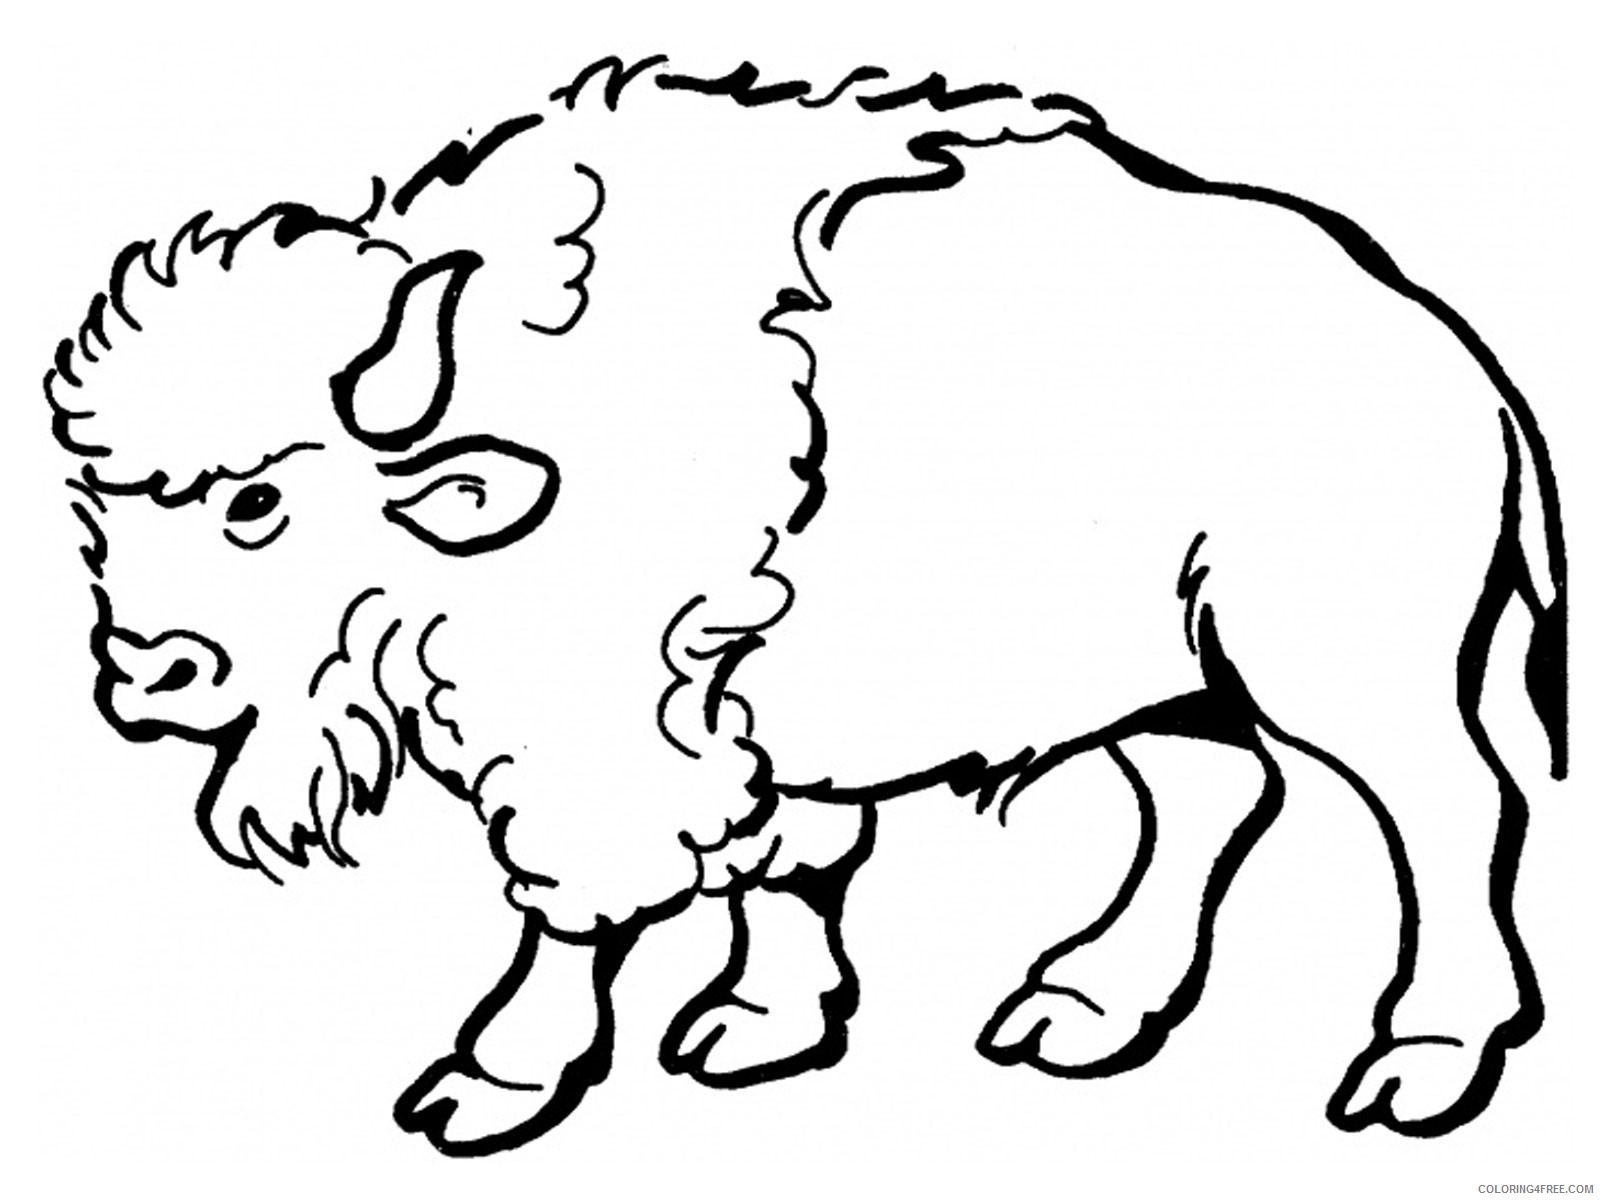 Bison Coloring Pages bison for kids Printable Coloring4free